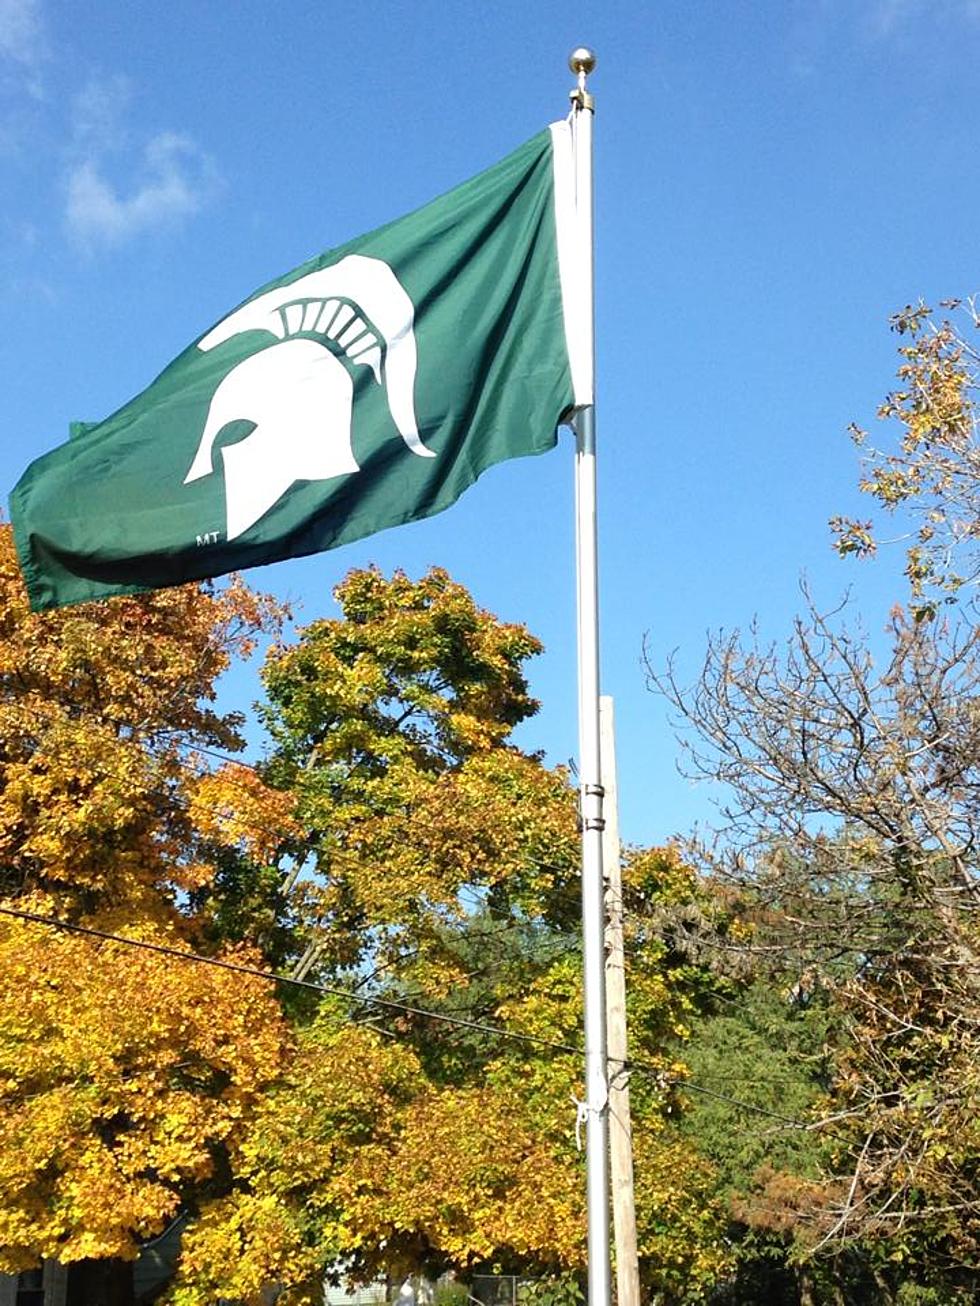 MSU Makes a New – And Sort of Creepy – Achievement List